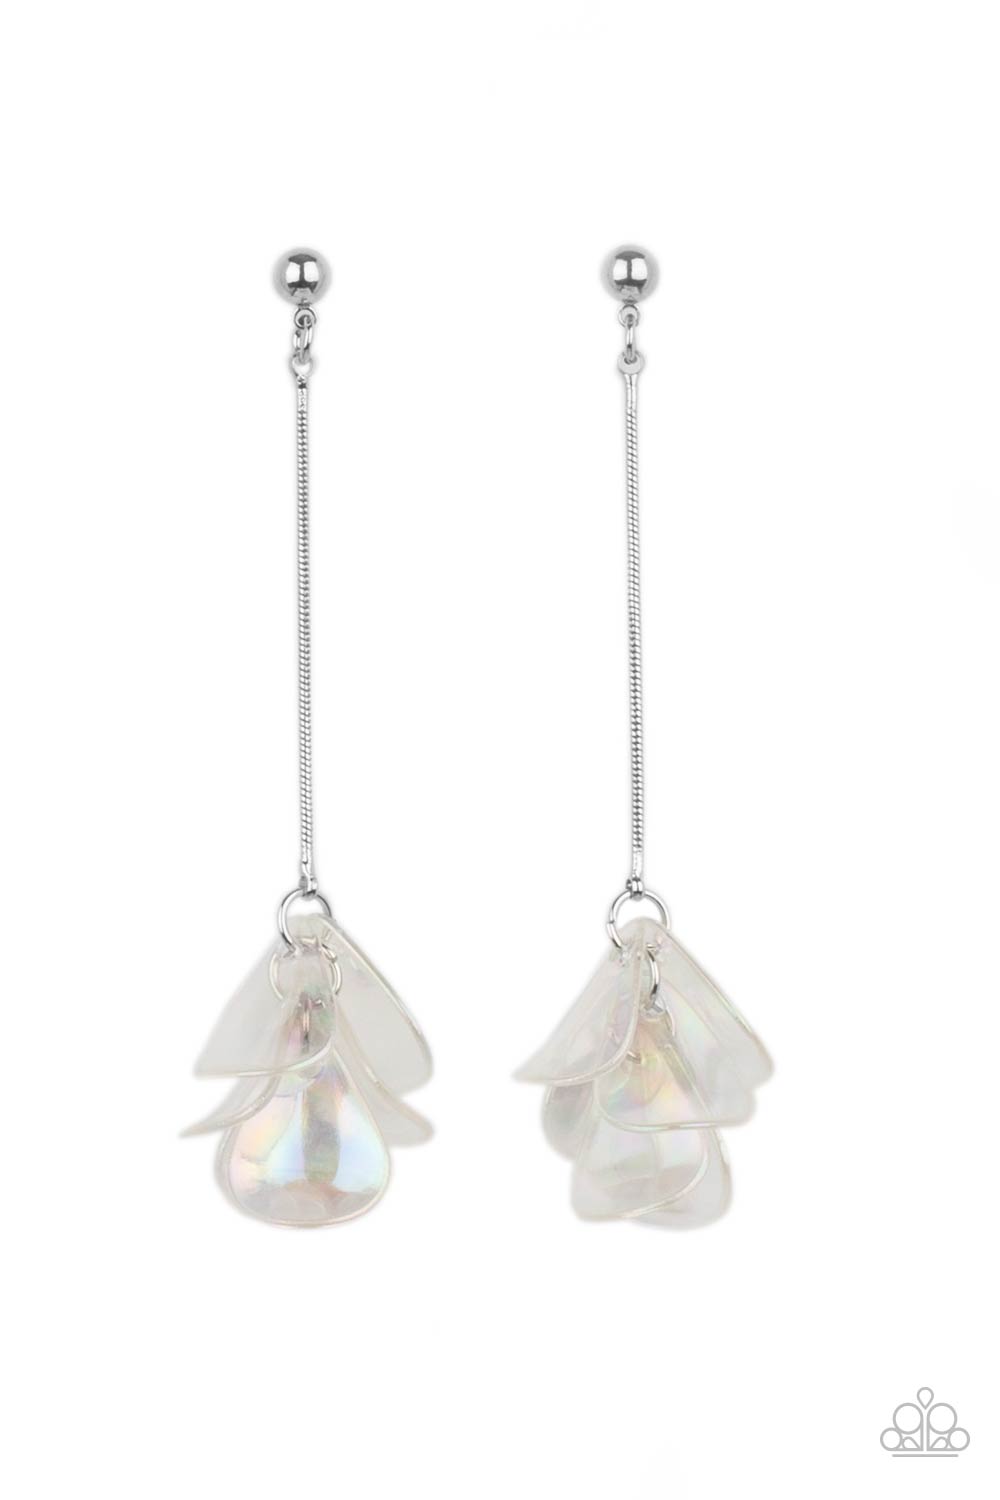 Keep Them In Suspense Multi Earring - Paparazzi Accessories  Iridescent acrylic petals delicately cluster at the bottom of a shiny silver chain, creating an ethereal tassel. Earring attaches to a standard post fitting.  All Paparazzi Accessories are lead free and nickel free!  Sold as one pair of post earrings.